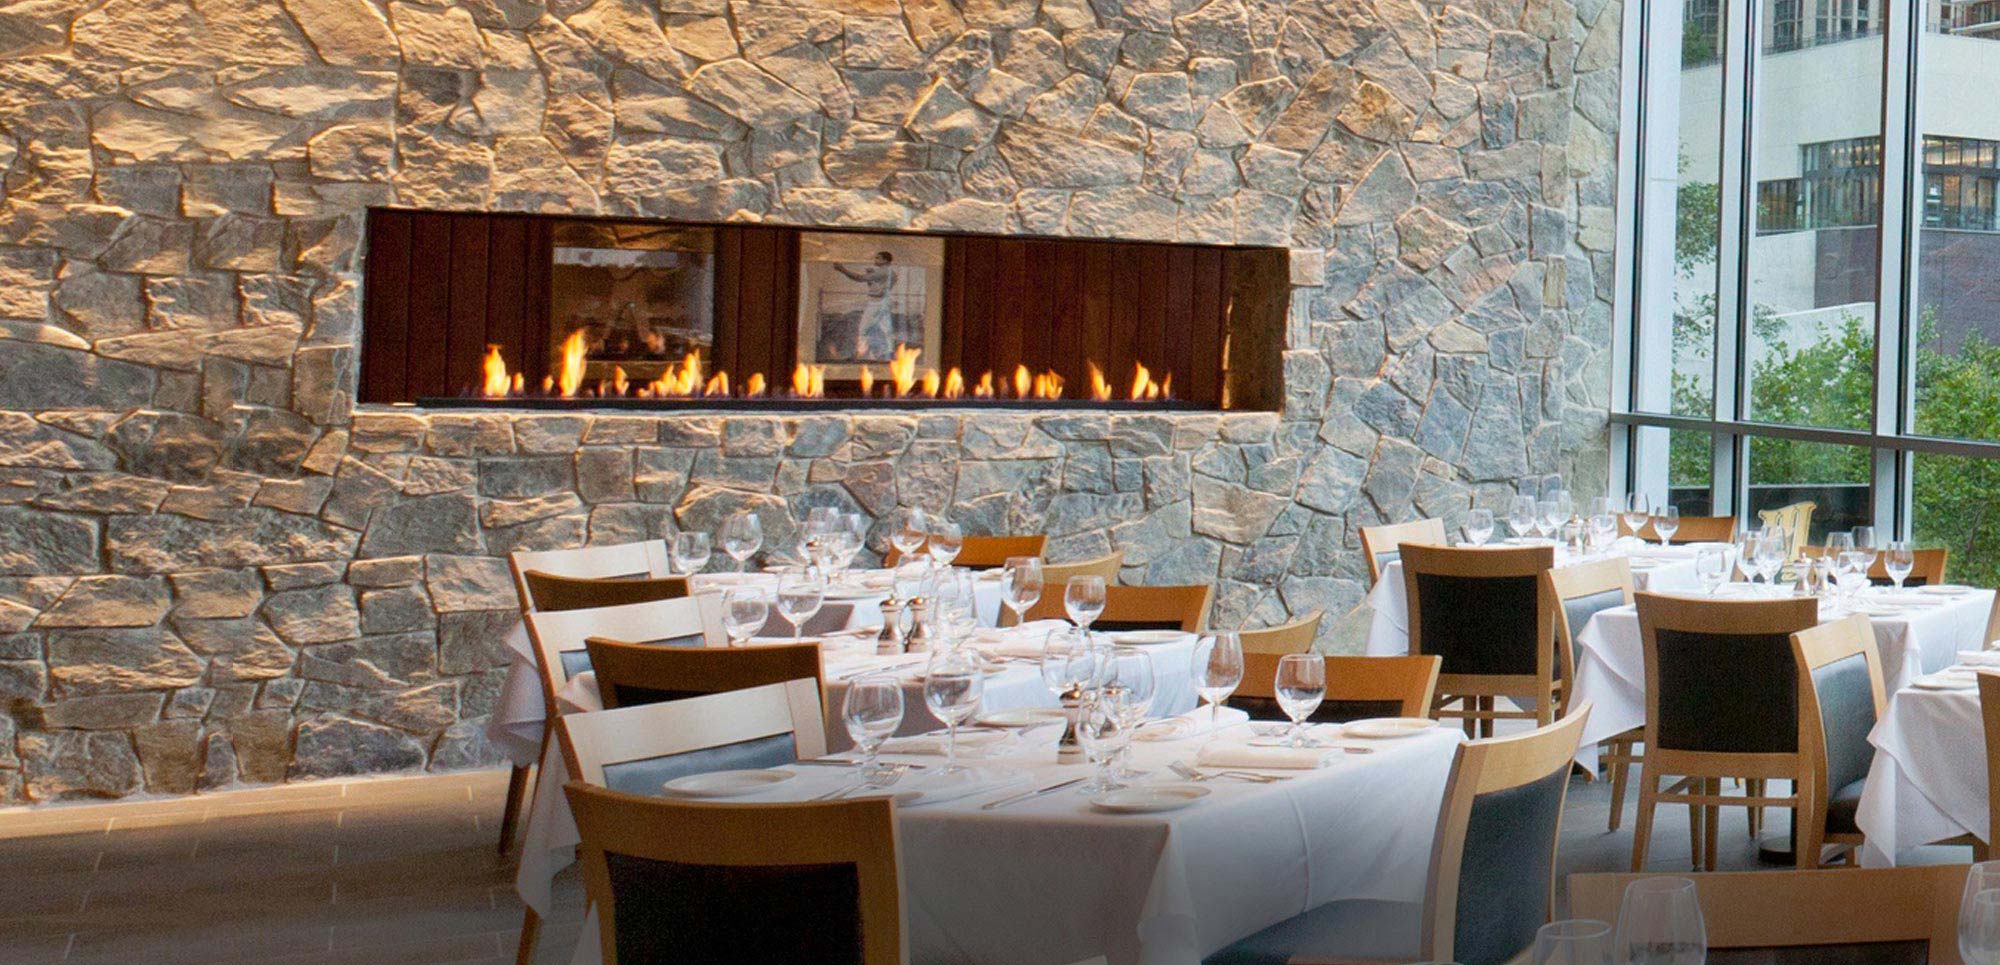 Hotels with Fireplaces Lovely Spark Modern Fires